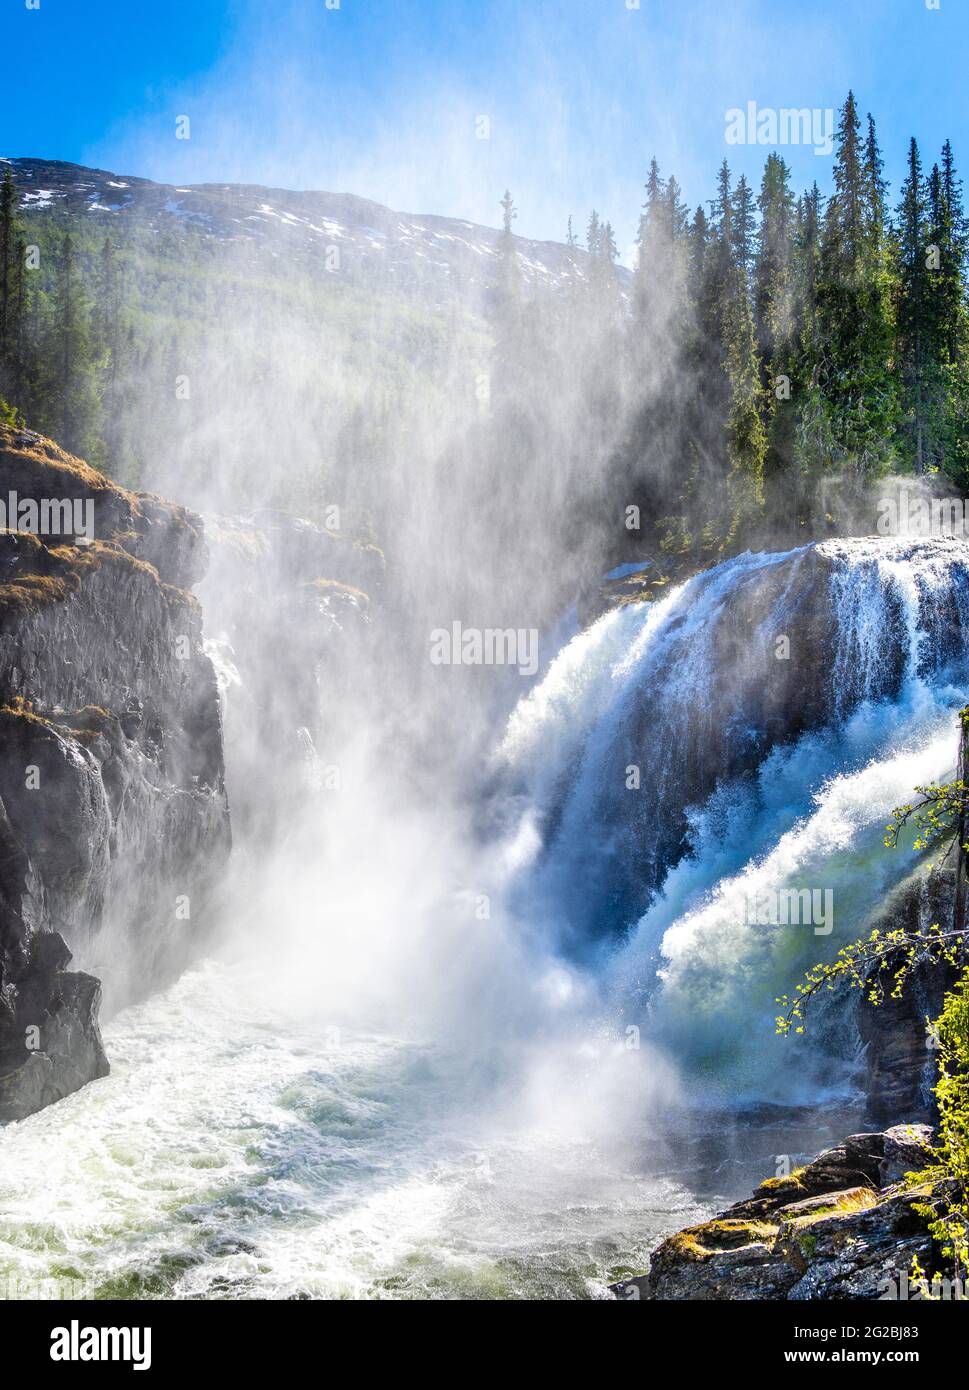 A famous waterfall in Hemsedal, Norway. Stock Photo